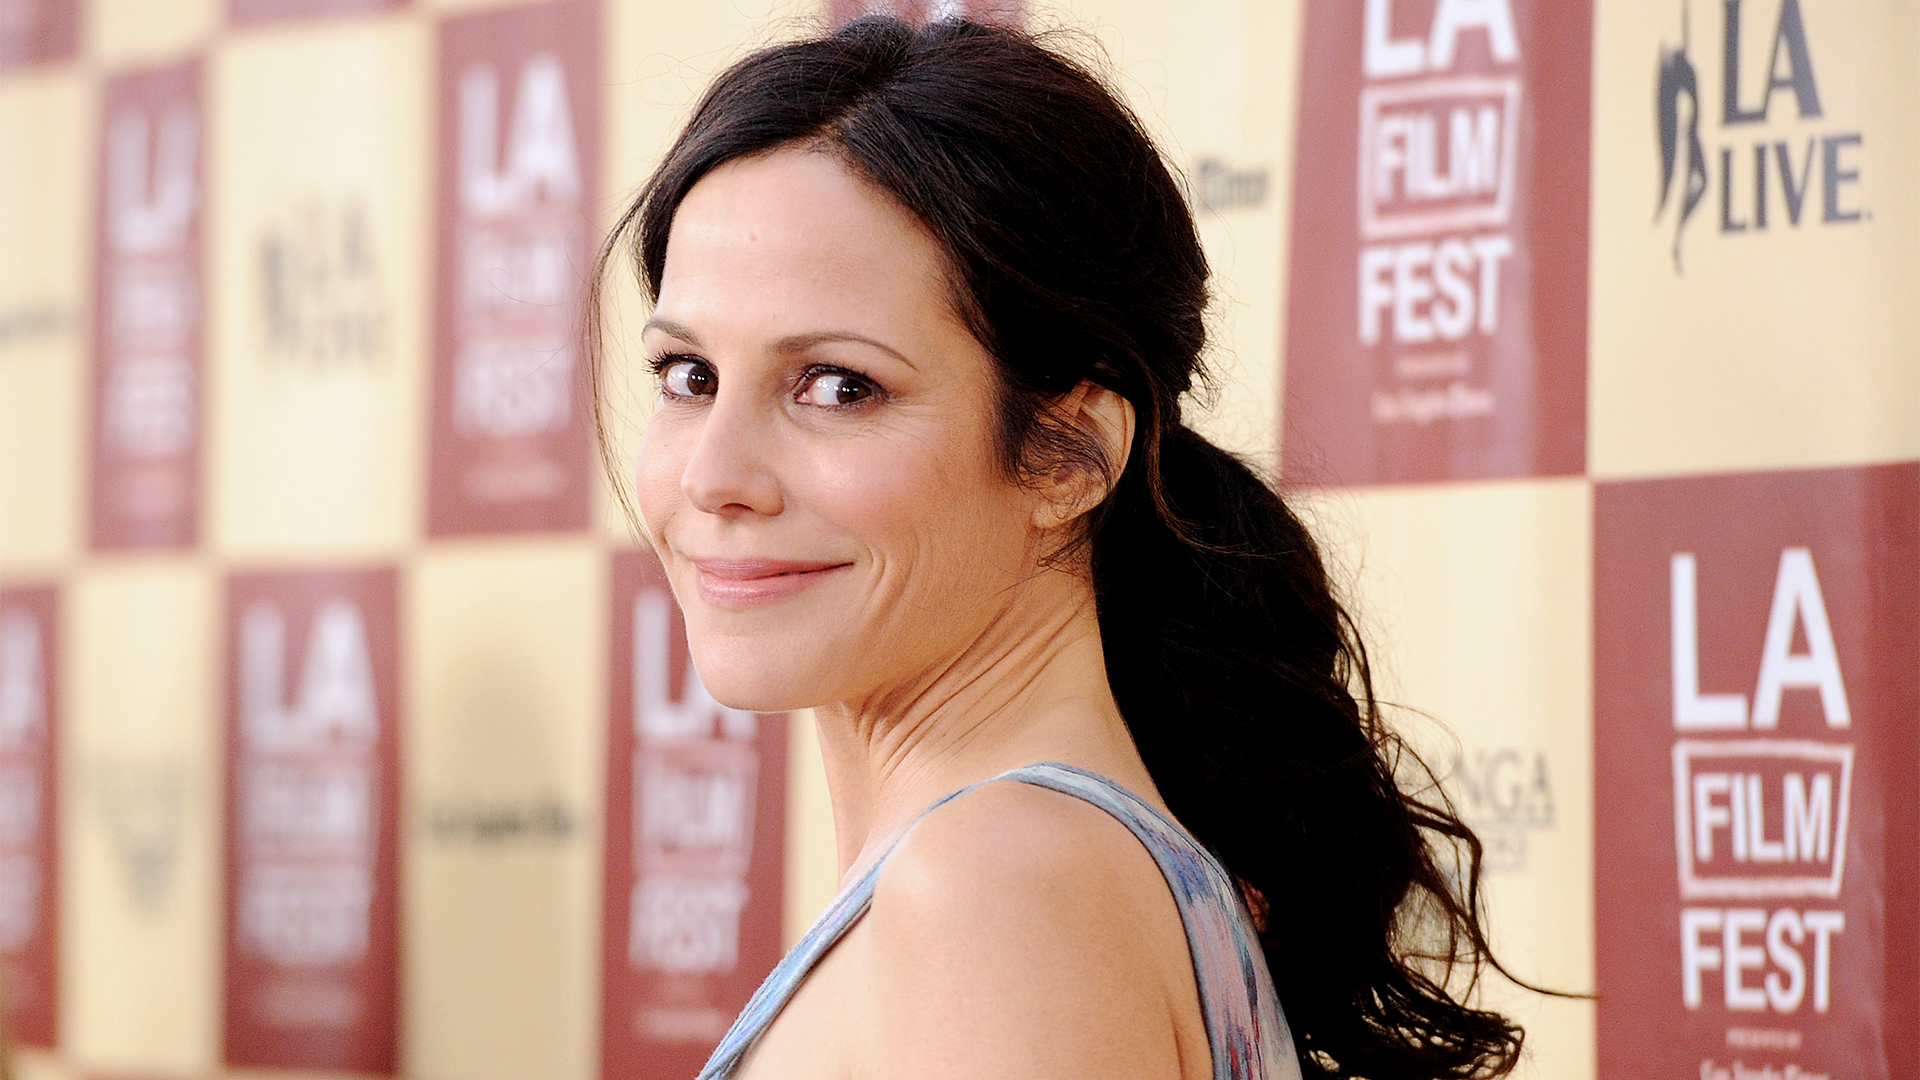 crystal pinard recommends mary louise parker scene pic